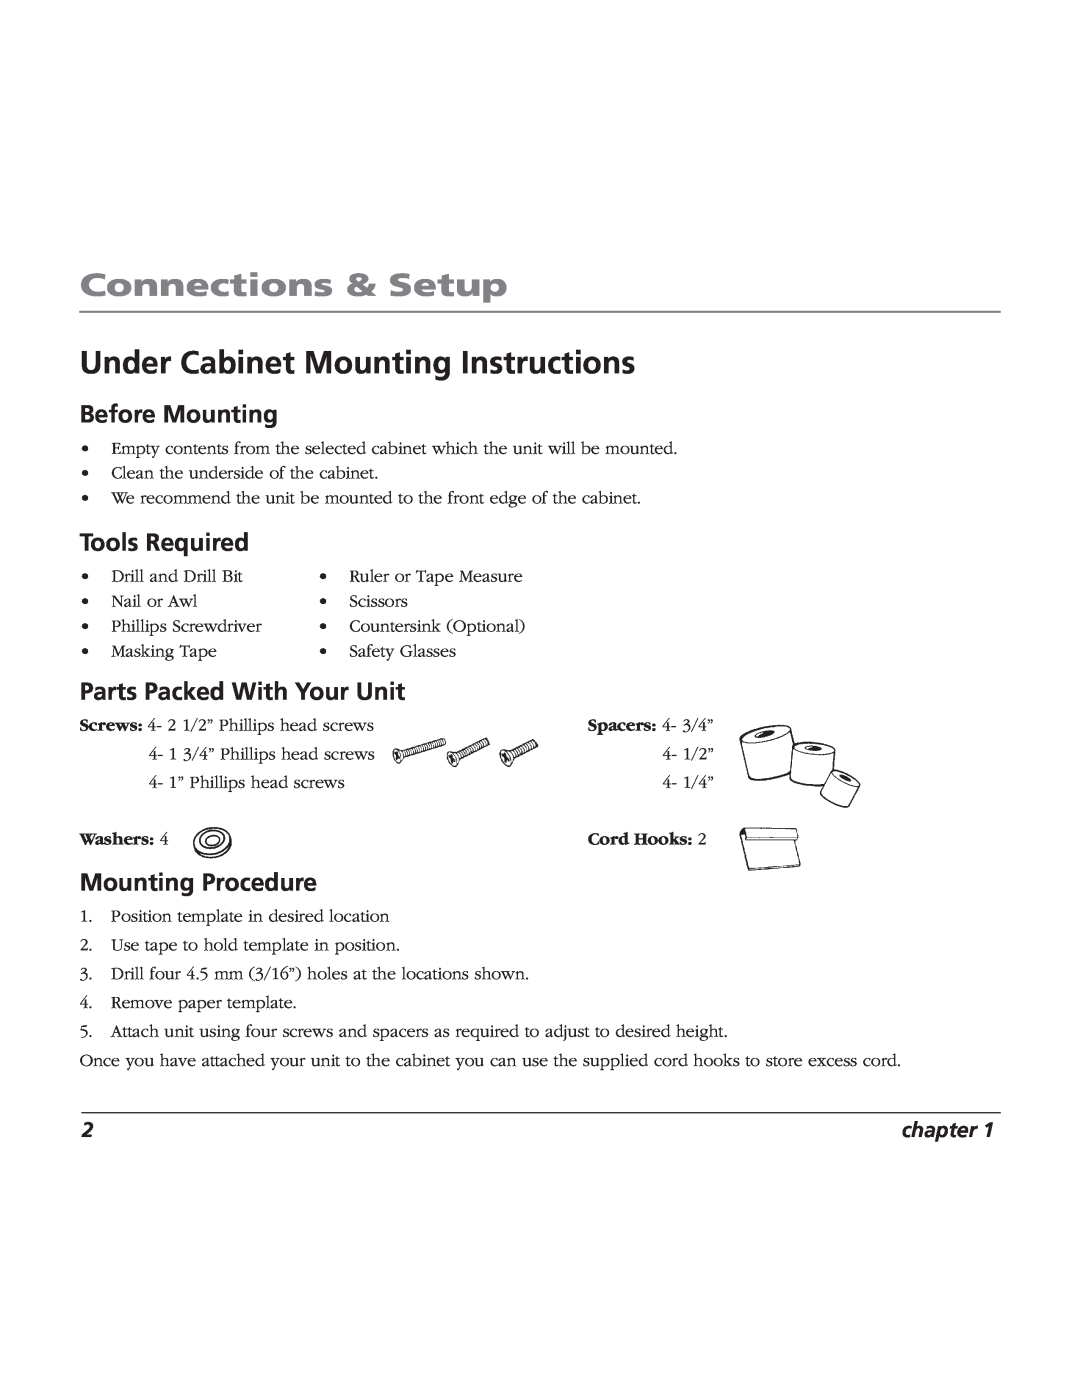 RCA TV/Radio/CD Player Connections & Setup, Under Cabinet Mounting Instructions, Before Mounting, Tools Required, chapter 